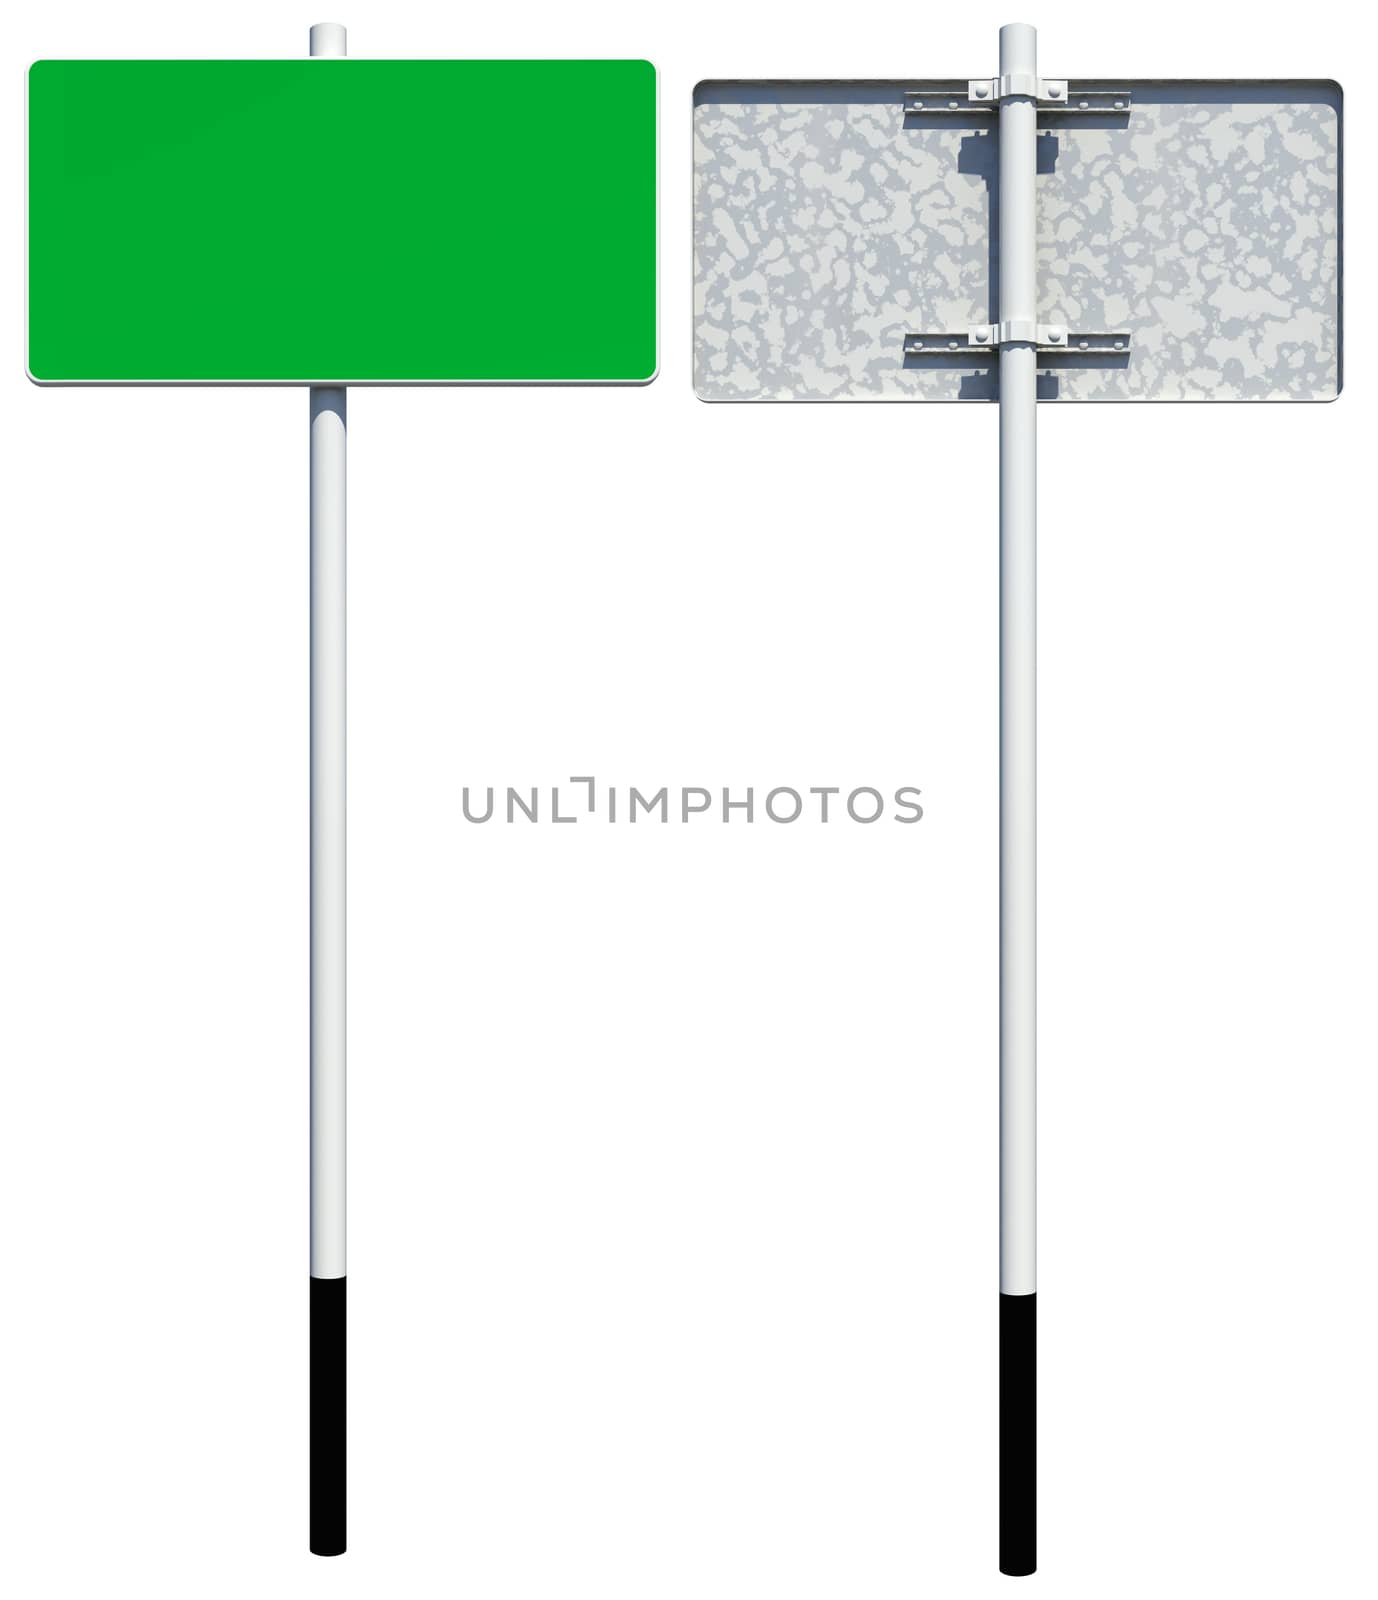 Rectangle green road sign. Front and back view. Isolated on white background